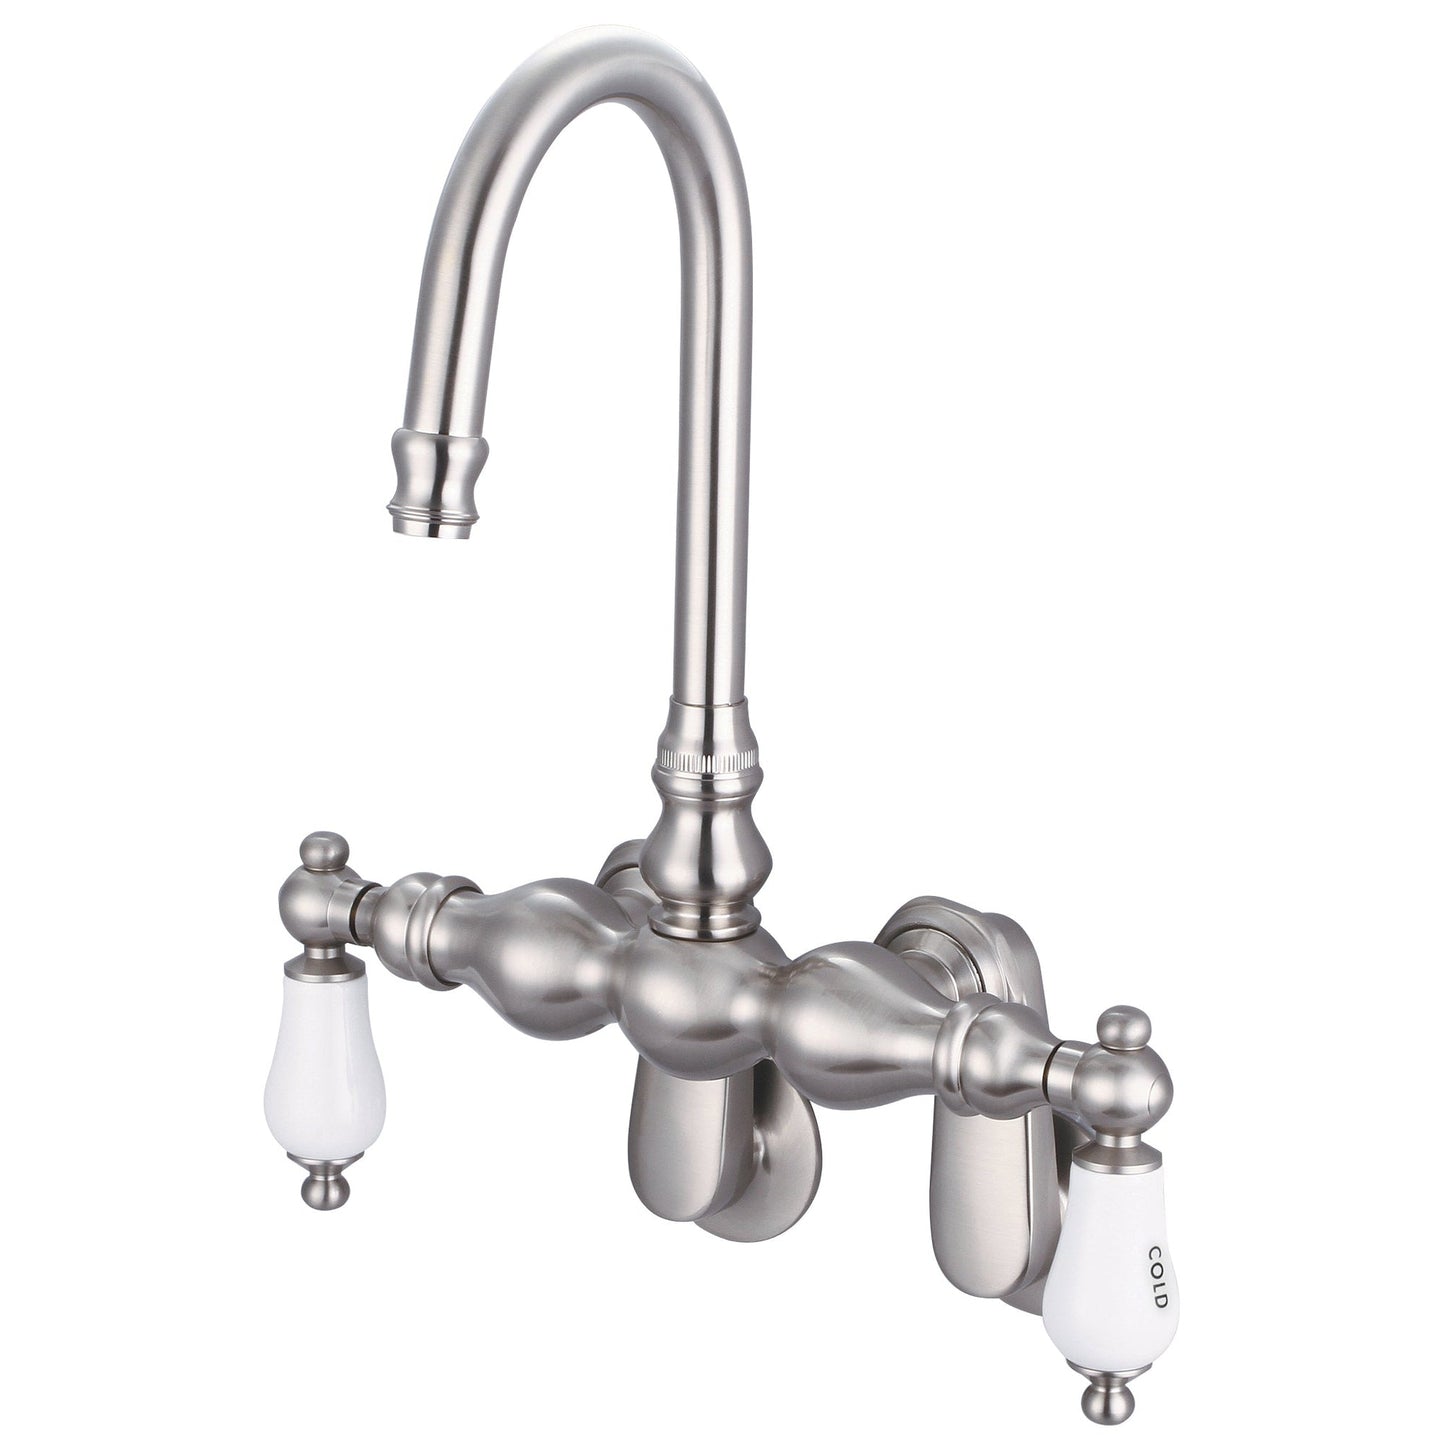 Water Creation Vintage Classic Adjustable Spread Wall Mount Tub F6-0015 9.25" Grey Solid Brass Faucet With Gooseneck Spout And Swivel Wall Connector And Porcelain Lever Handles, Hot And Cold Labels Included